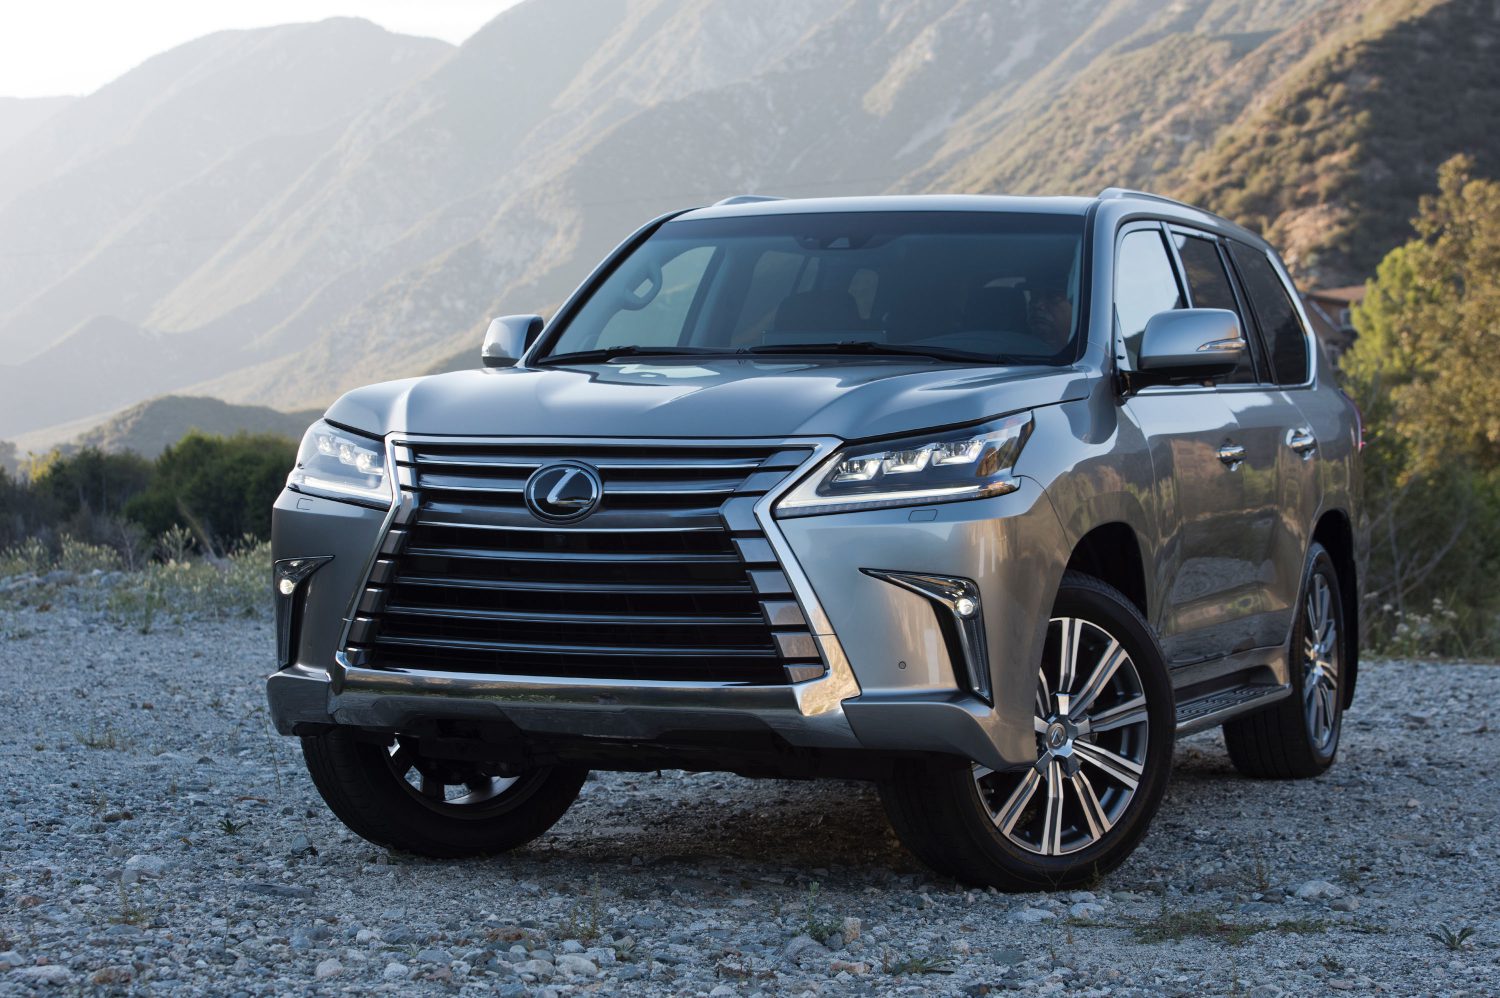 Making a Classic Entrance: Lexus Debuts Refreshed 2016 LX 570 Luxury  Utility Vehicle at Pebble Beach Concours d? Elegance - Lexus USA Newsroom